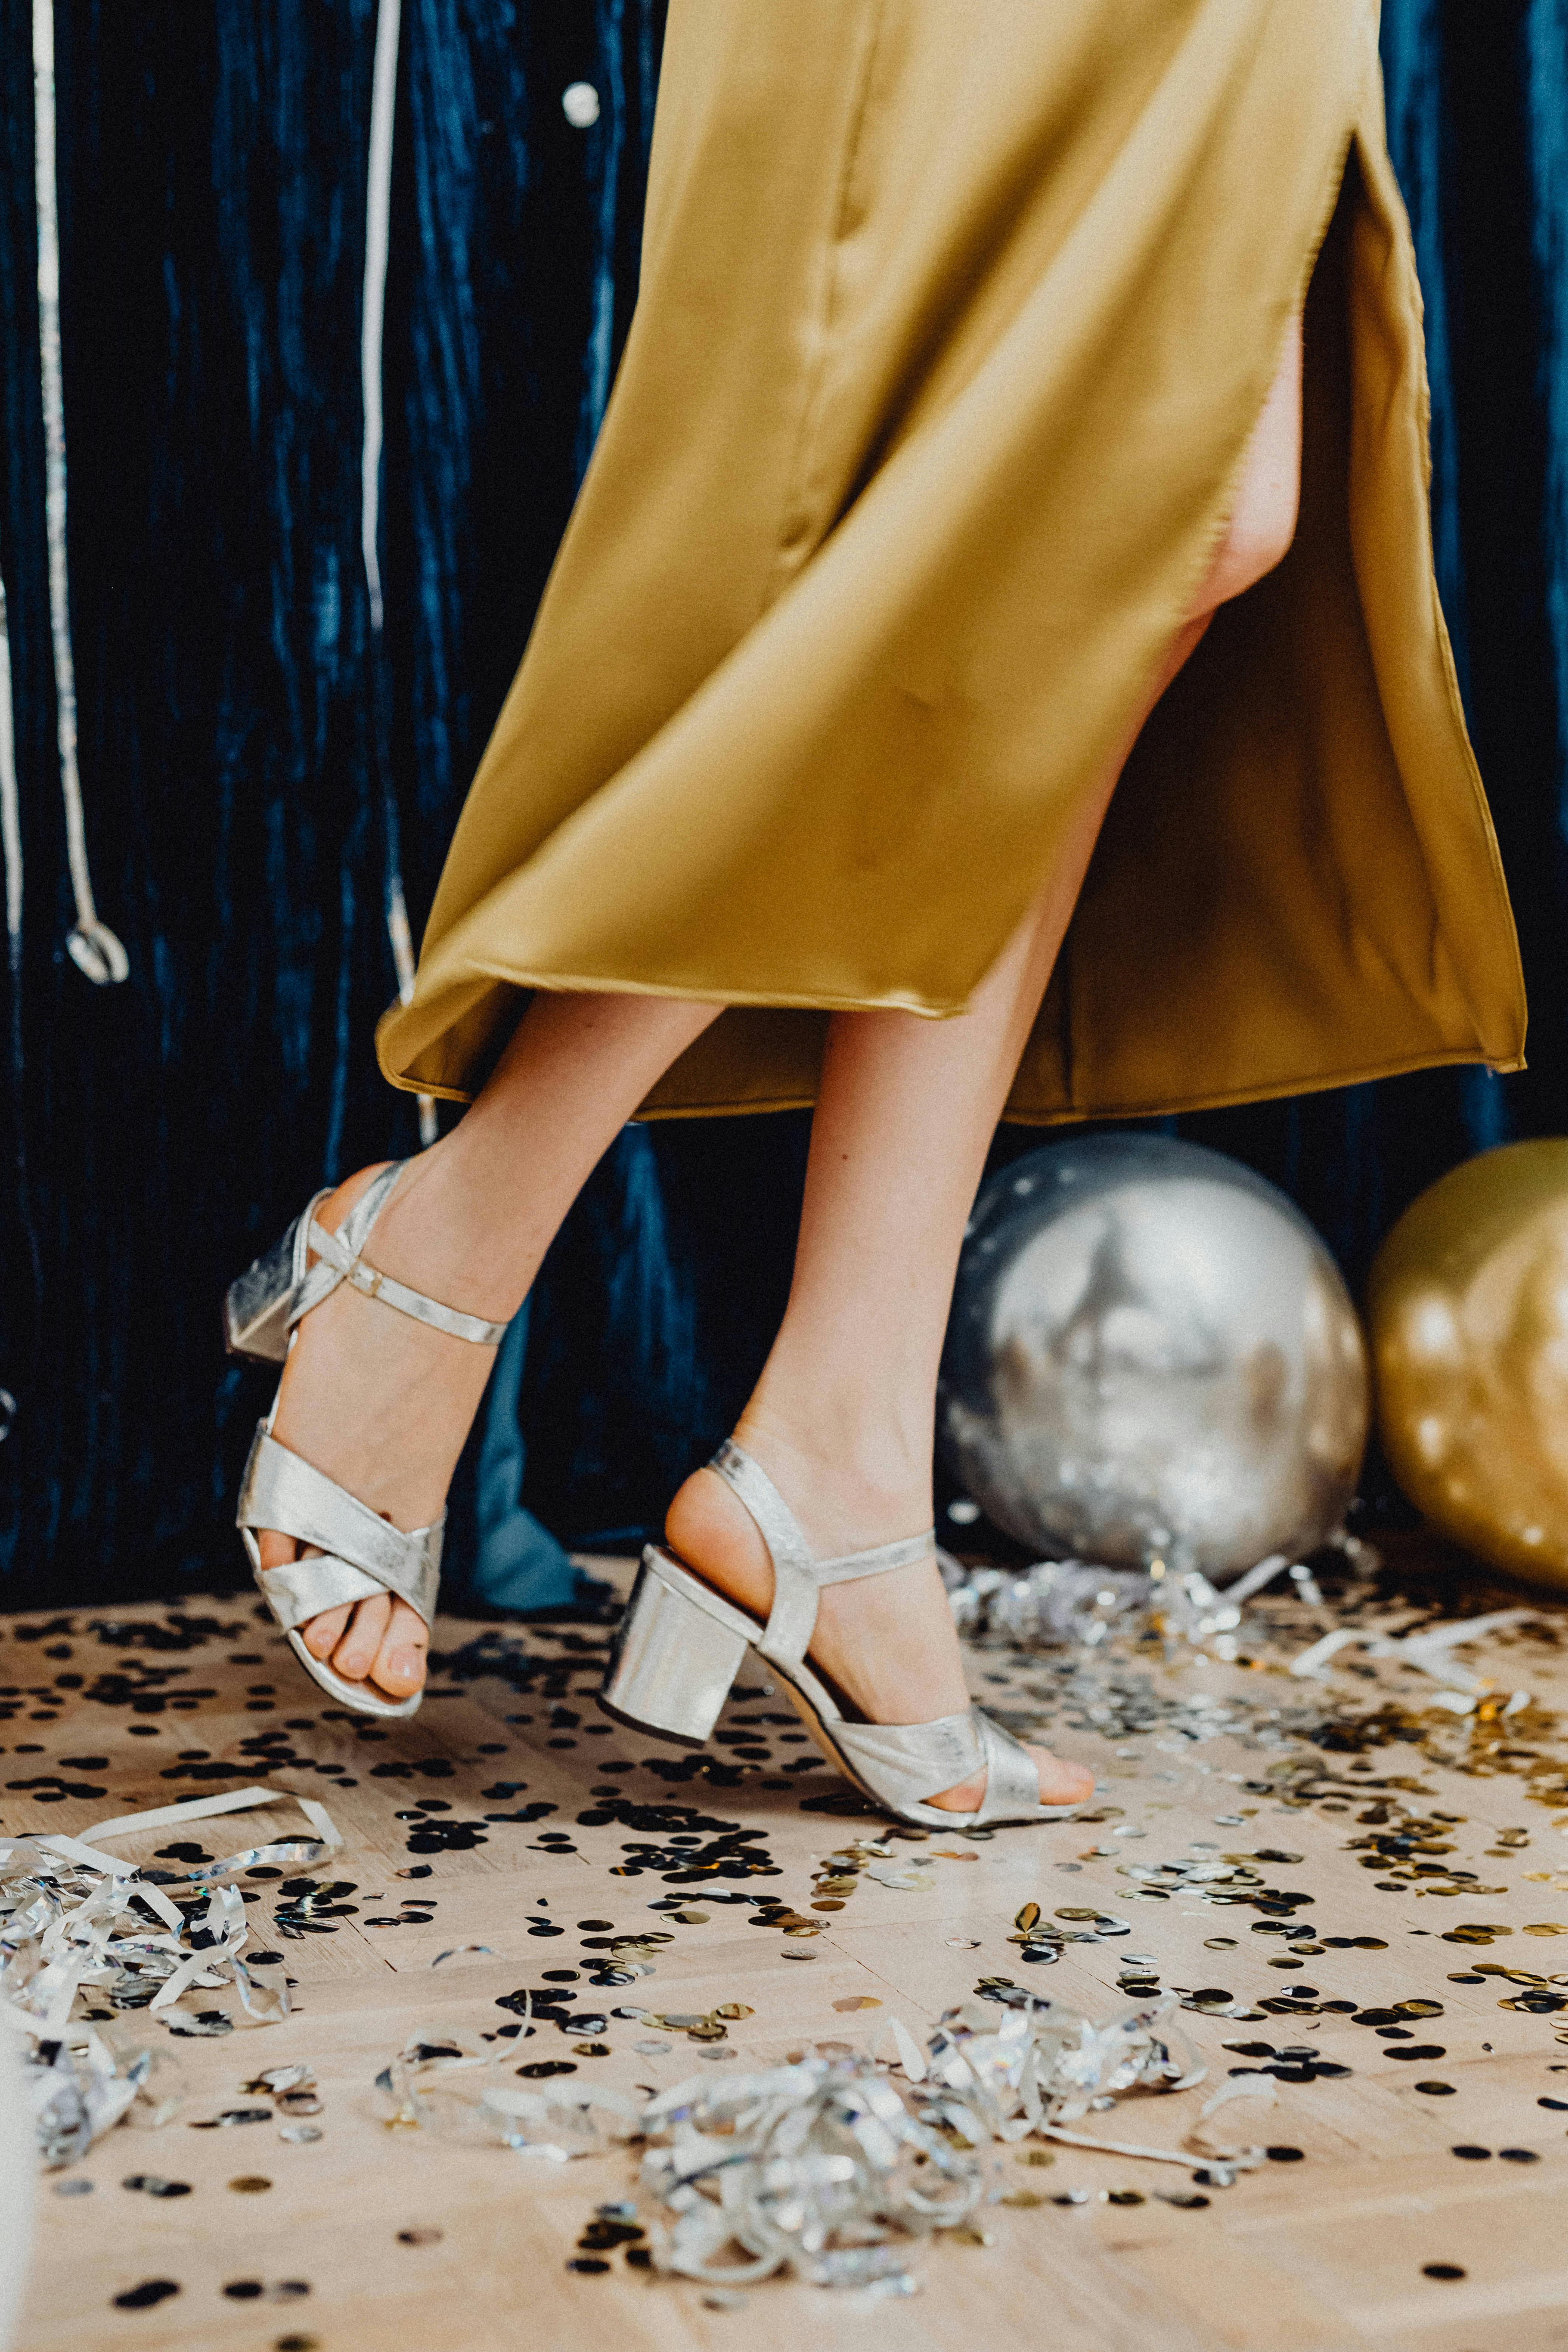 A woman wearing a gold dress and silver shoes | Source: Pexels